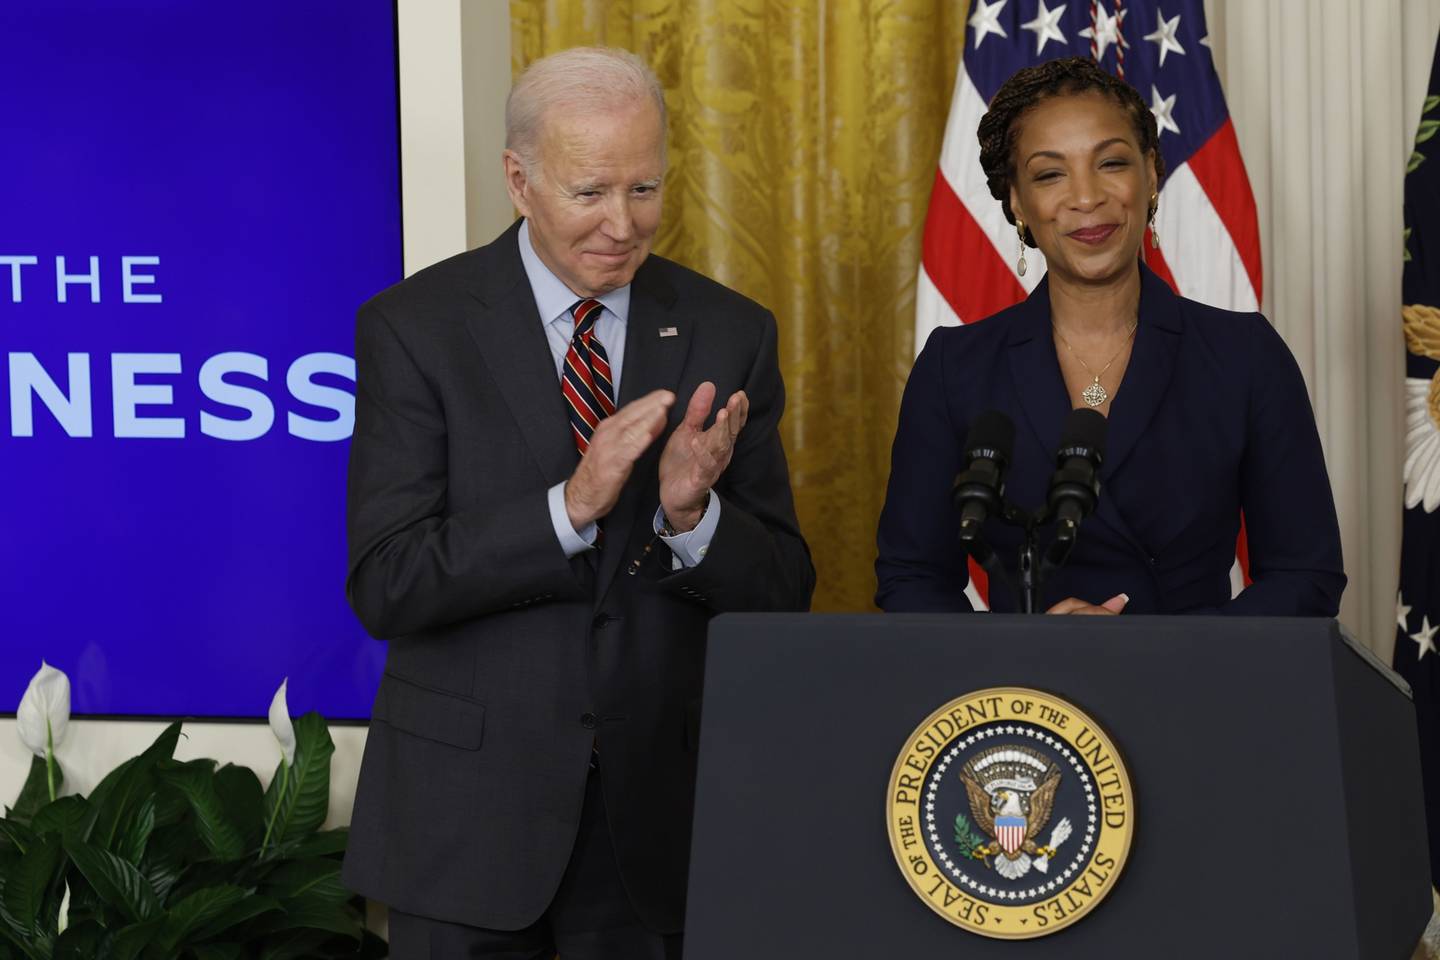 King attends the Small Business Administration's Women's Business Summit with US President Joe Biden at the White House in Washington, on March 27. Photographer: Chip Somodevilla/Getty Images&nbsp;dfd